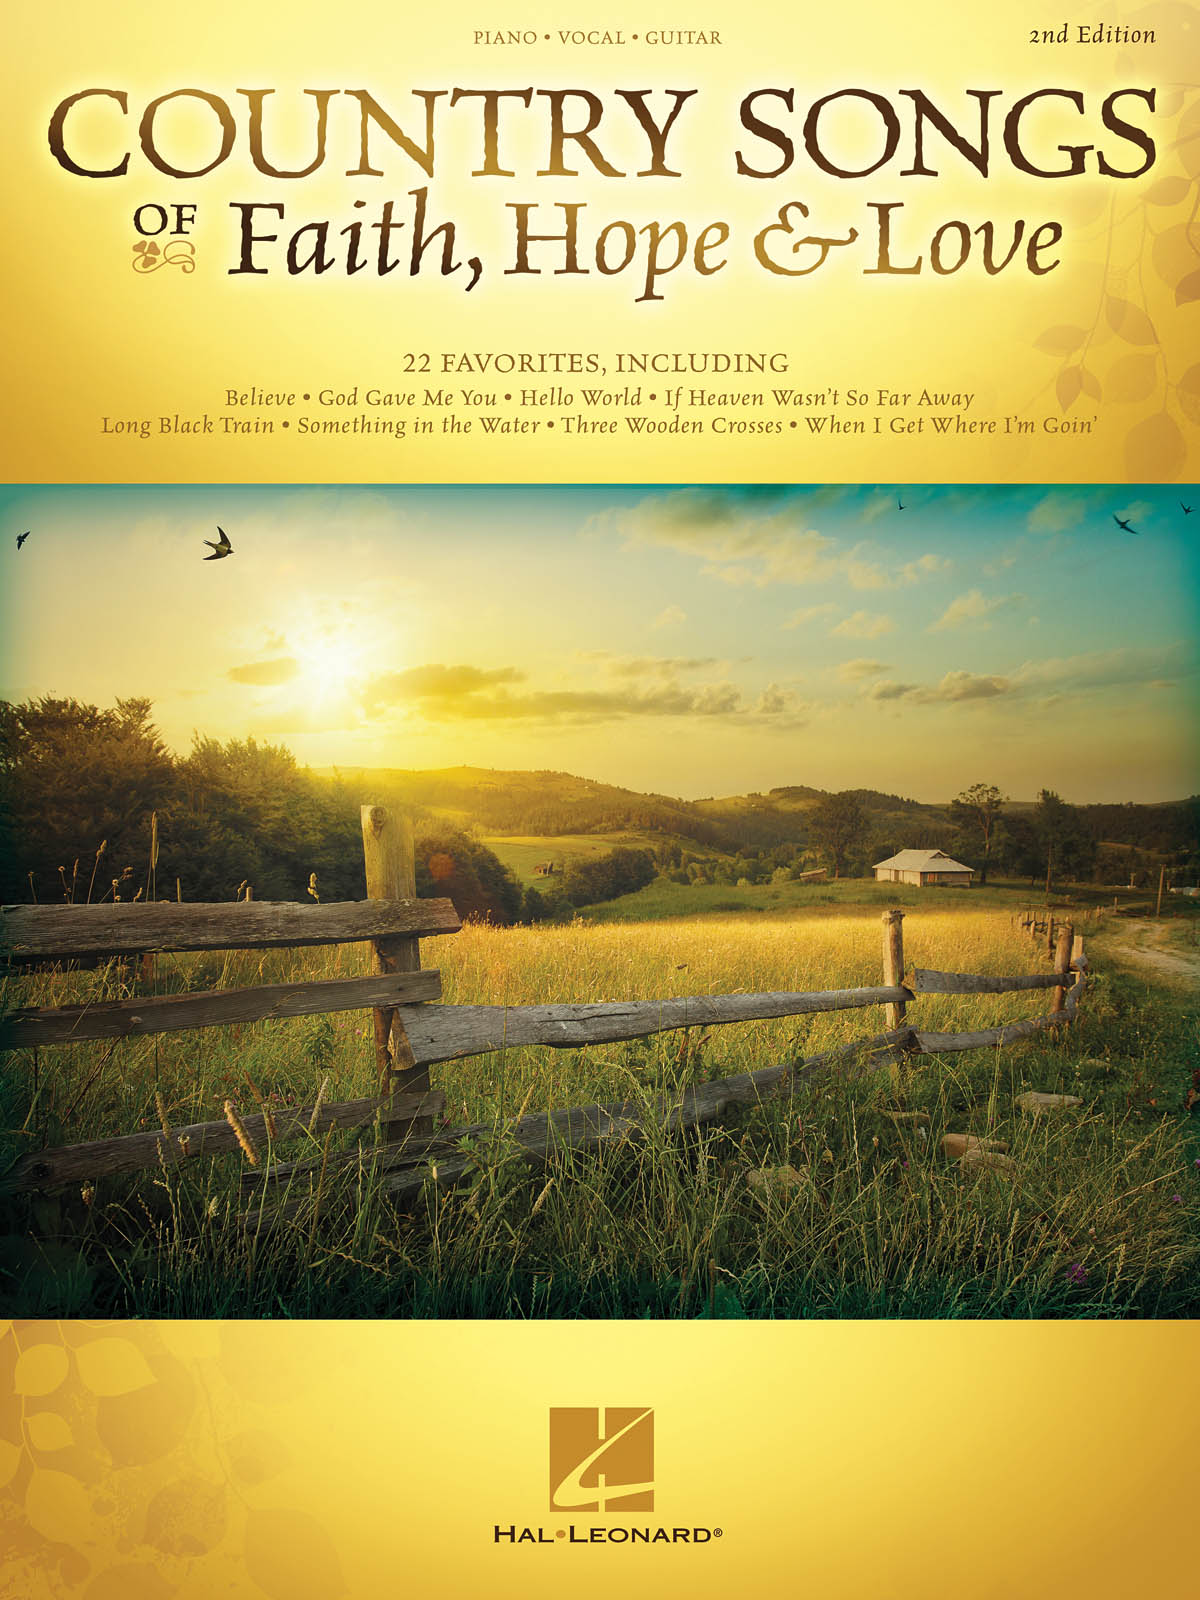 Country Songs of Faith  Hope & Love - 2nd Edition: Piano  Vocal and Guitar: